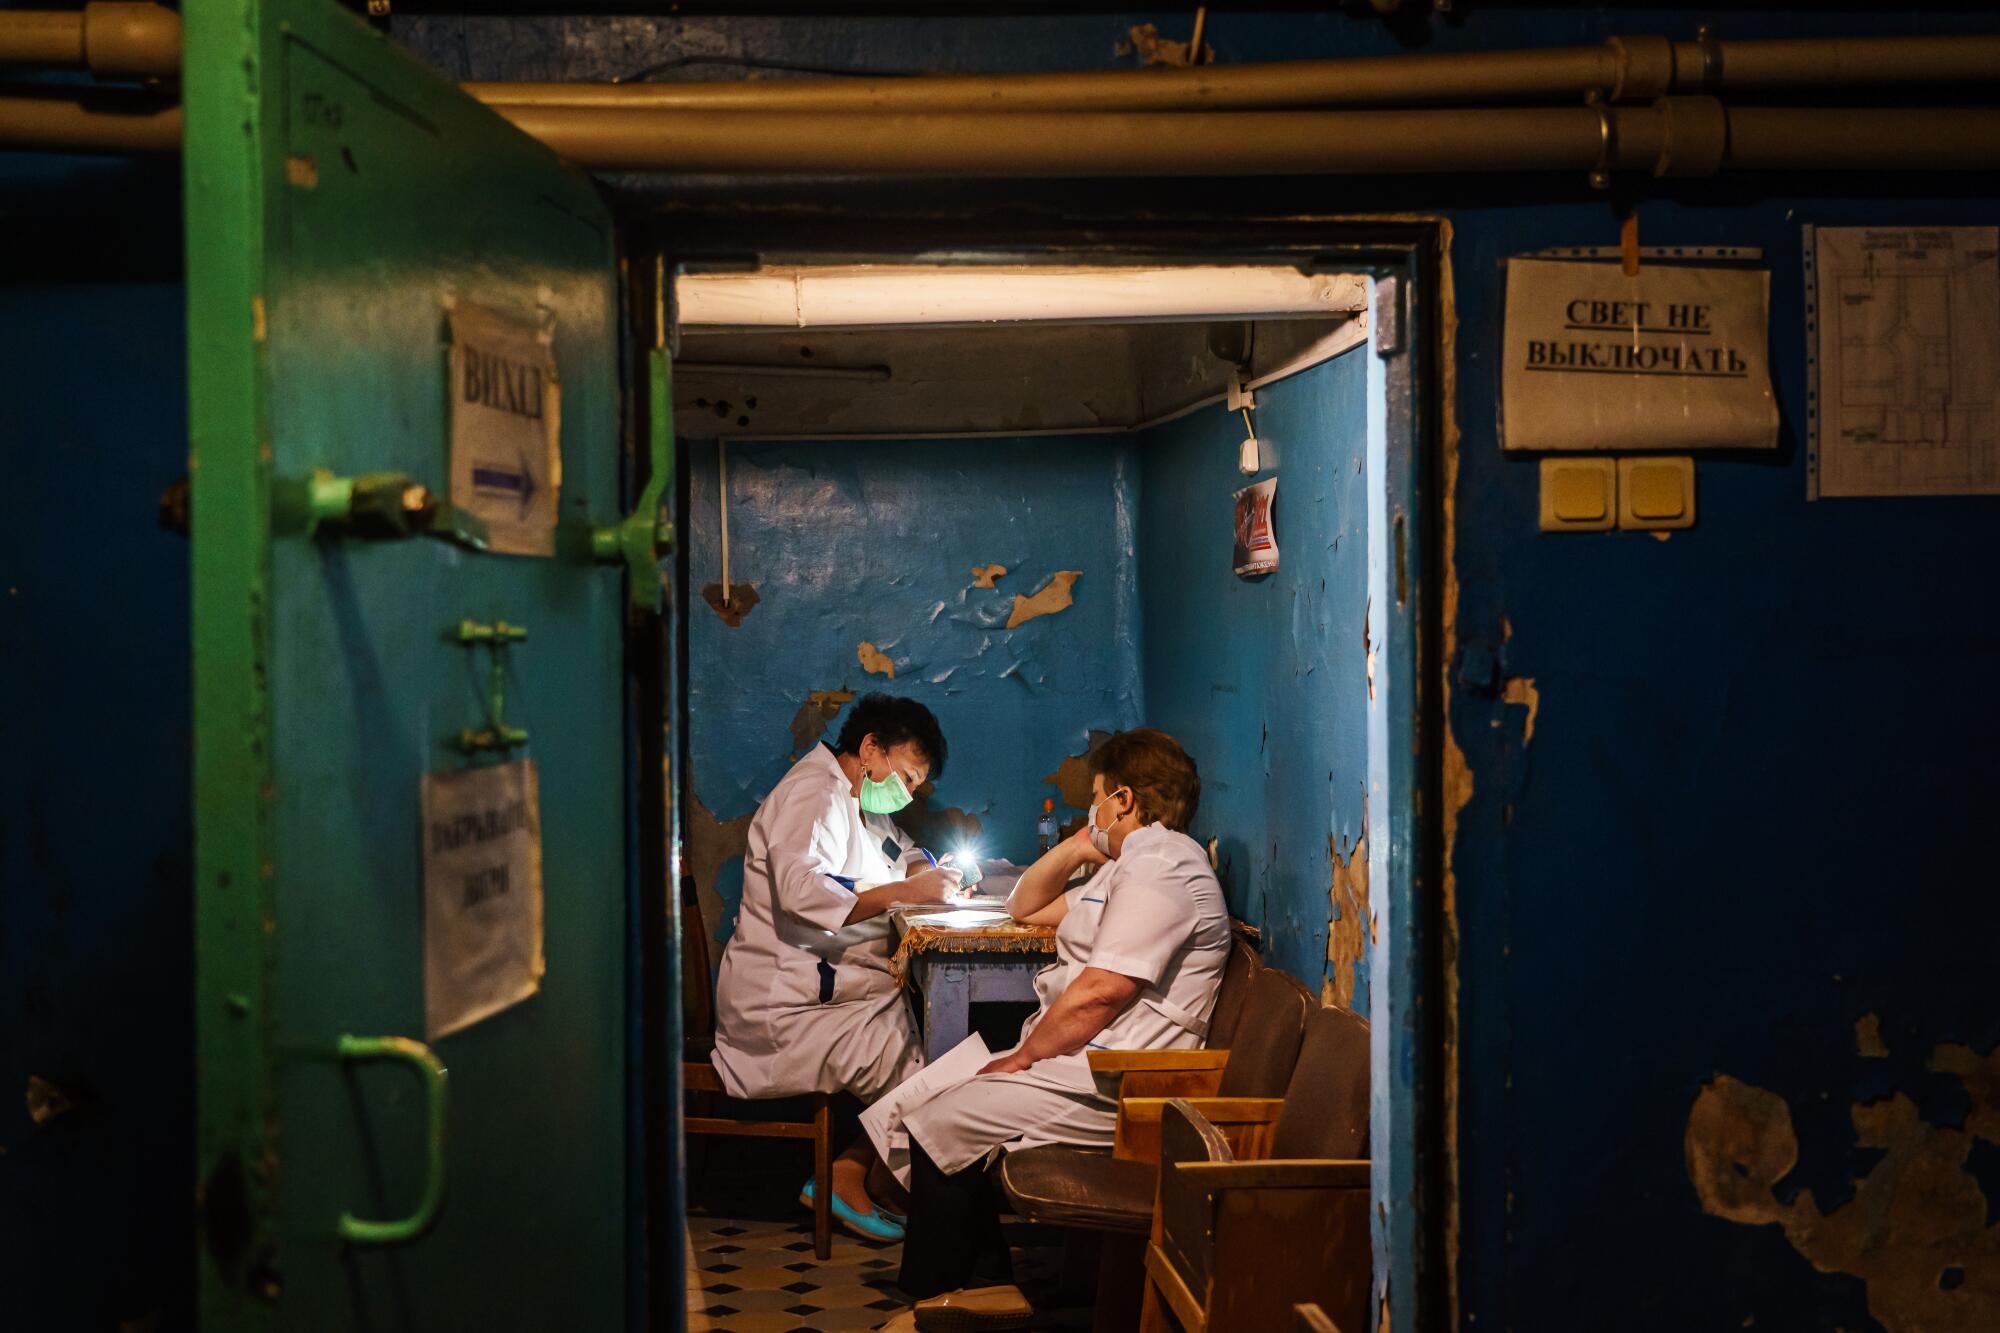 Two people in white hospital gowns sitting at a desk inside a dimly lit room in a dark underground shelter.